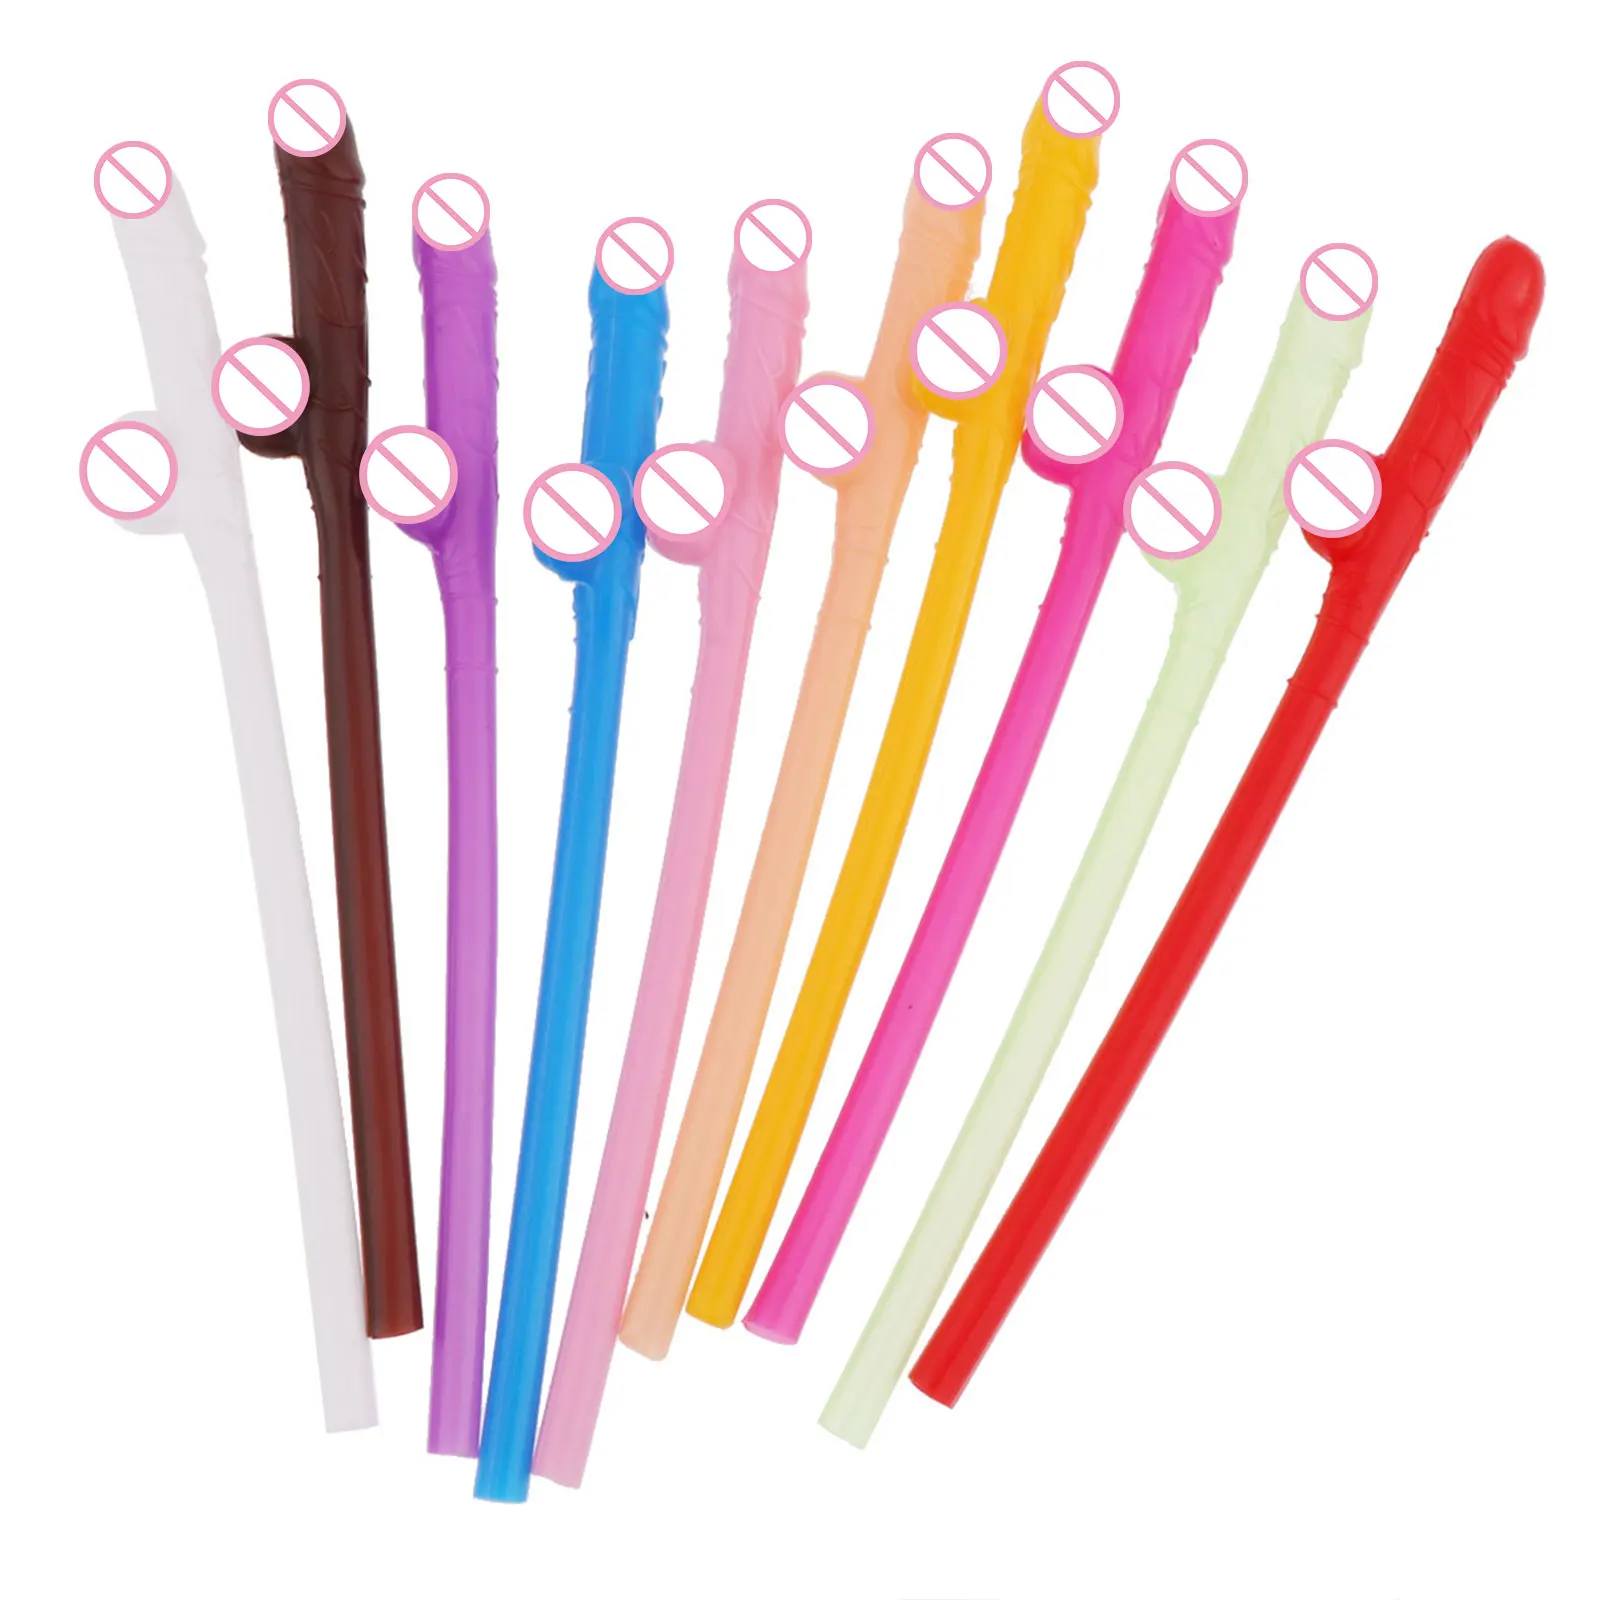 WILLY STRAWS X 20 PACK LADIES HEN PARTY NIGHT NOVELTY DICKY STRAW ACCESSORY 